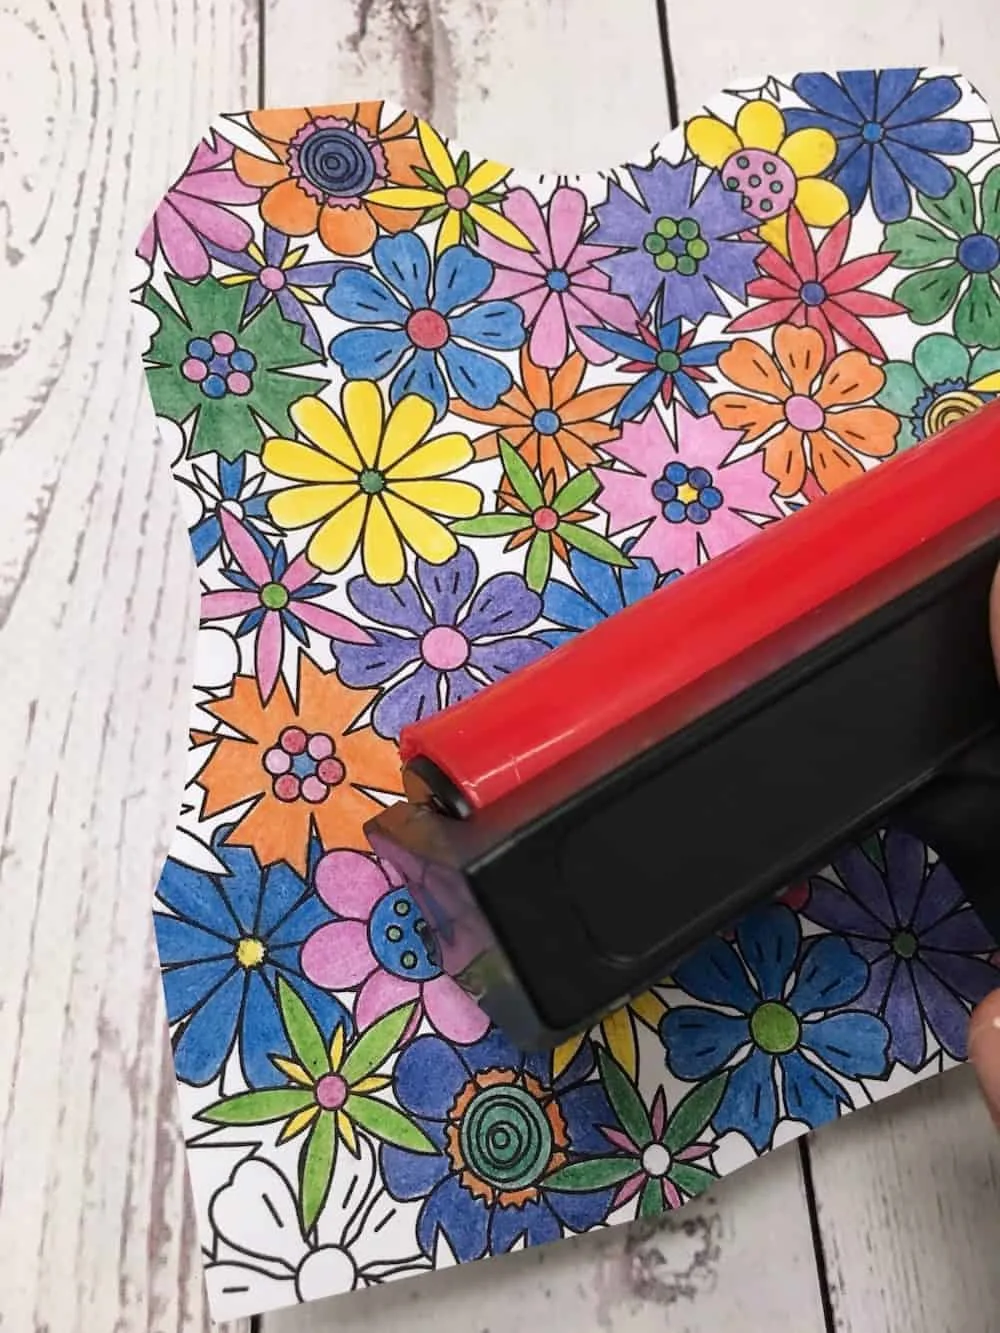 Applying a brayer to the top of the coloring page on the wood letter